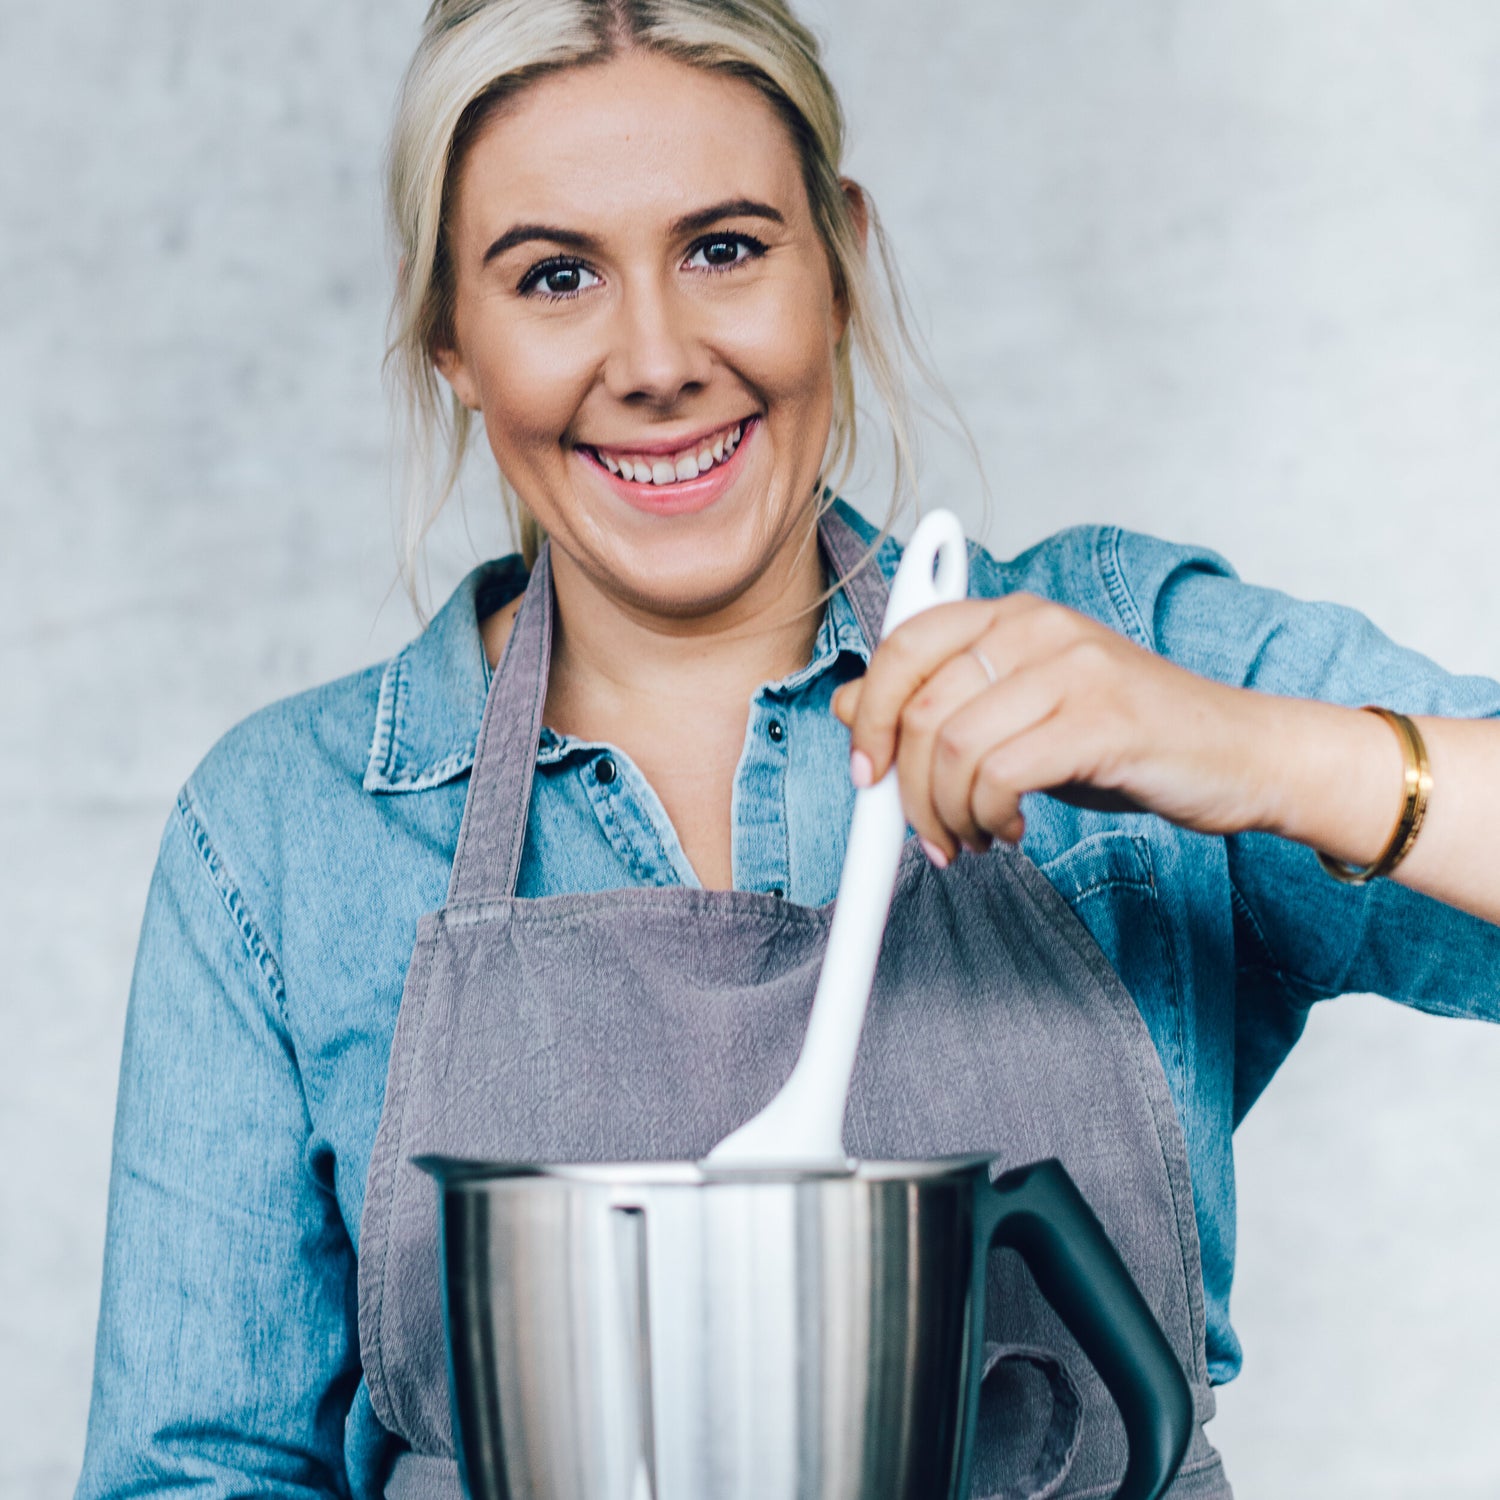 Thermomix Recipes to Add Big Flavour with Little Effort